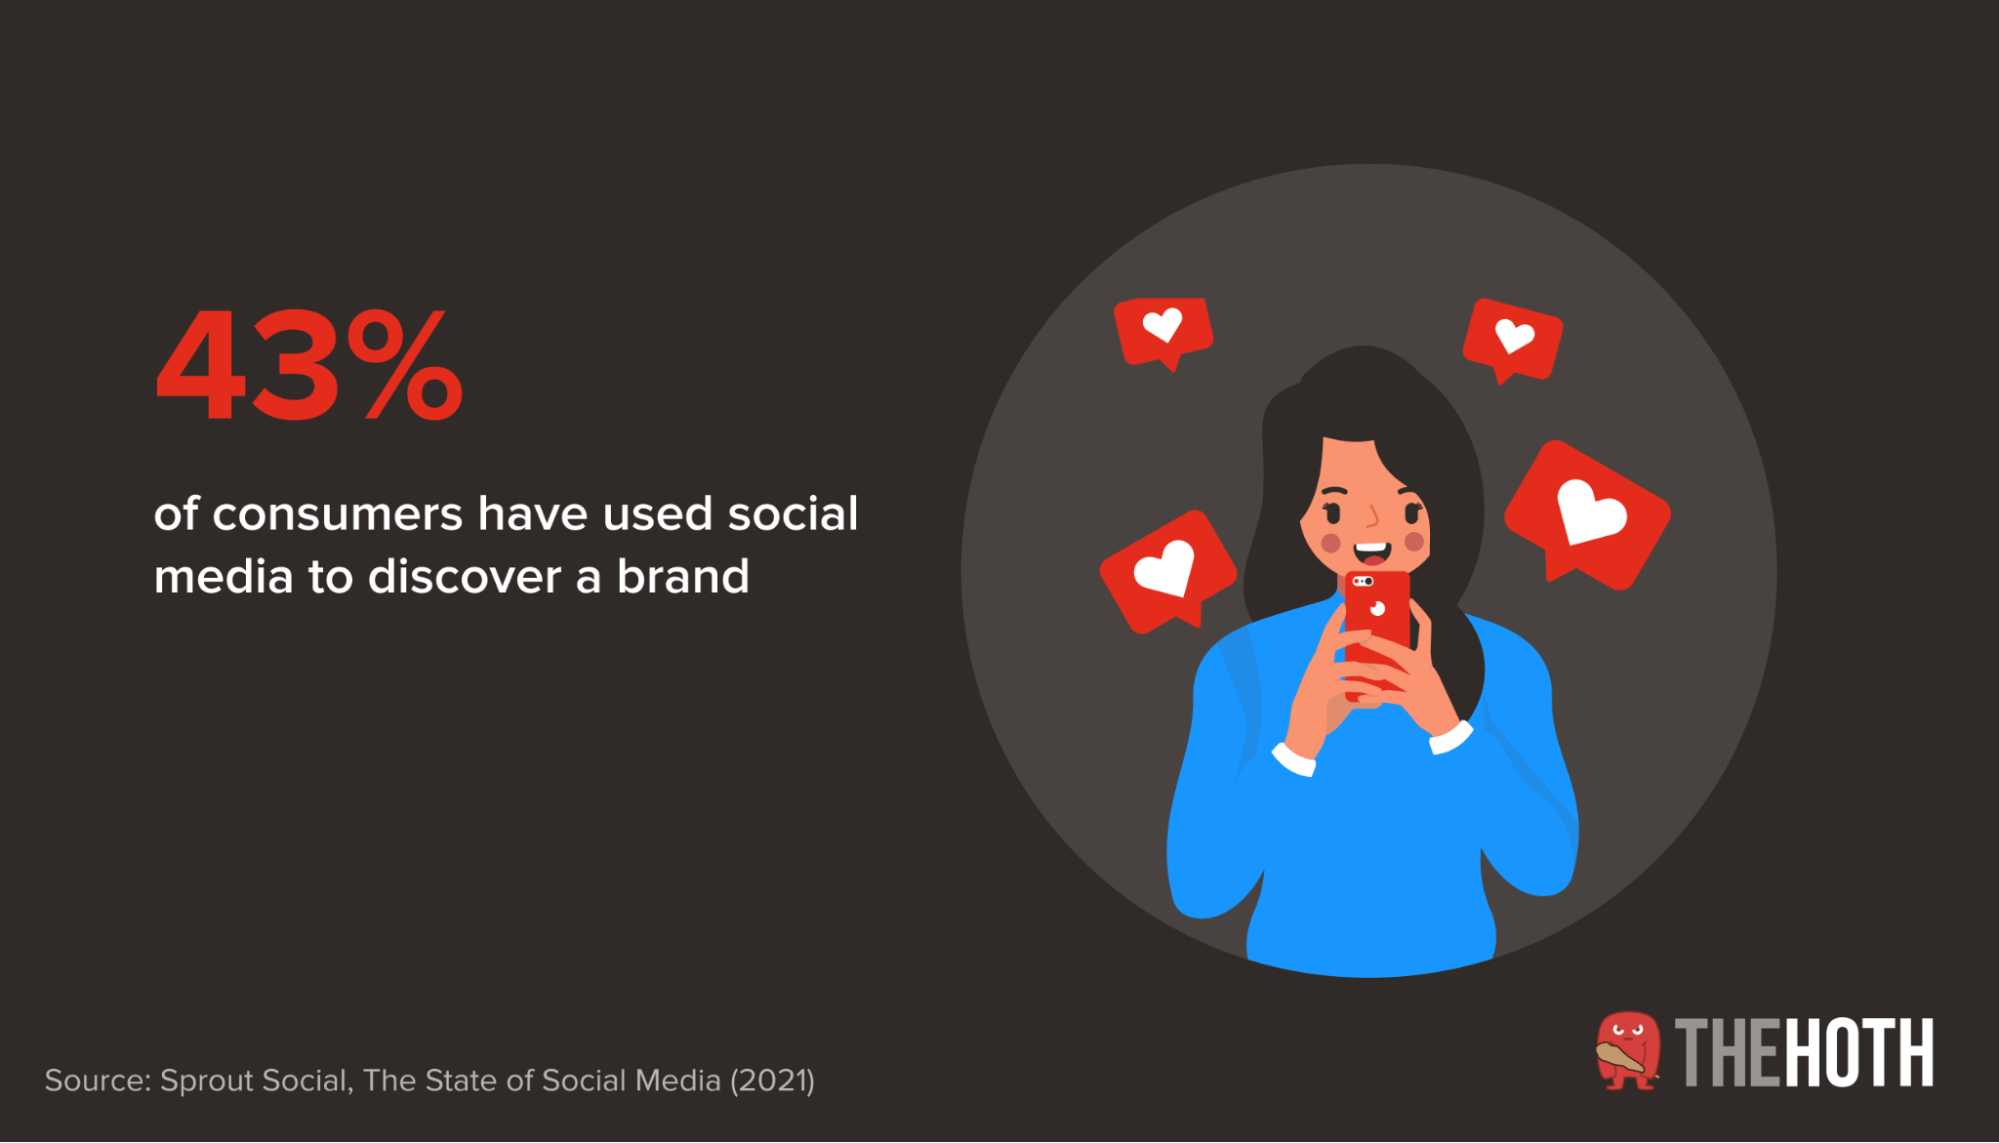 43% of consumers have discovered new brands on social media